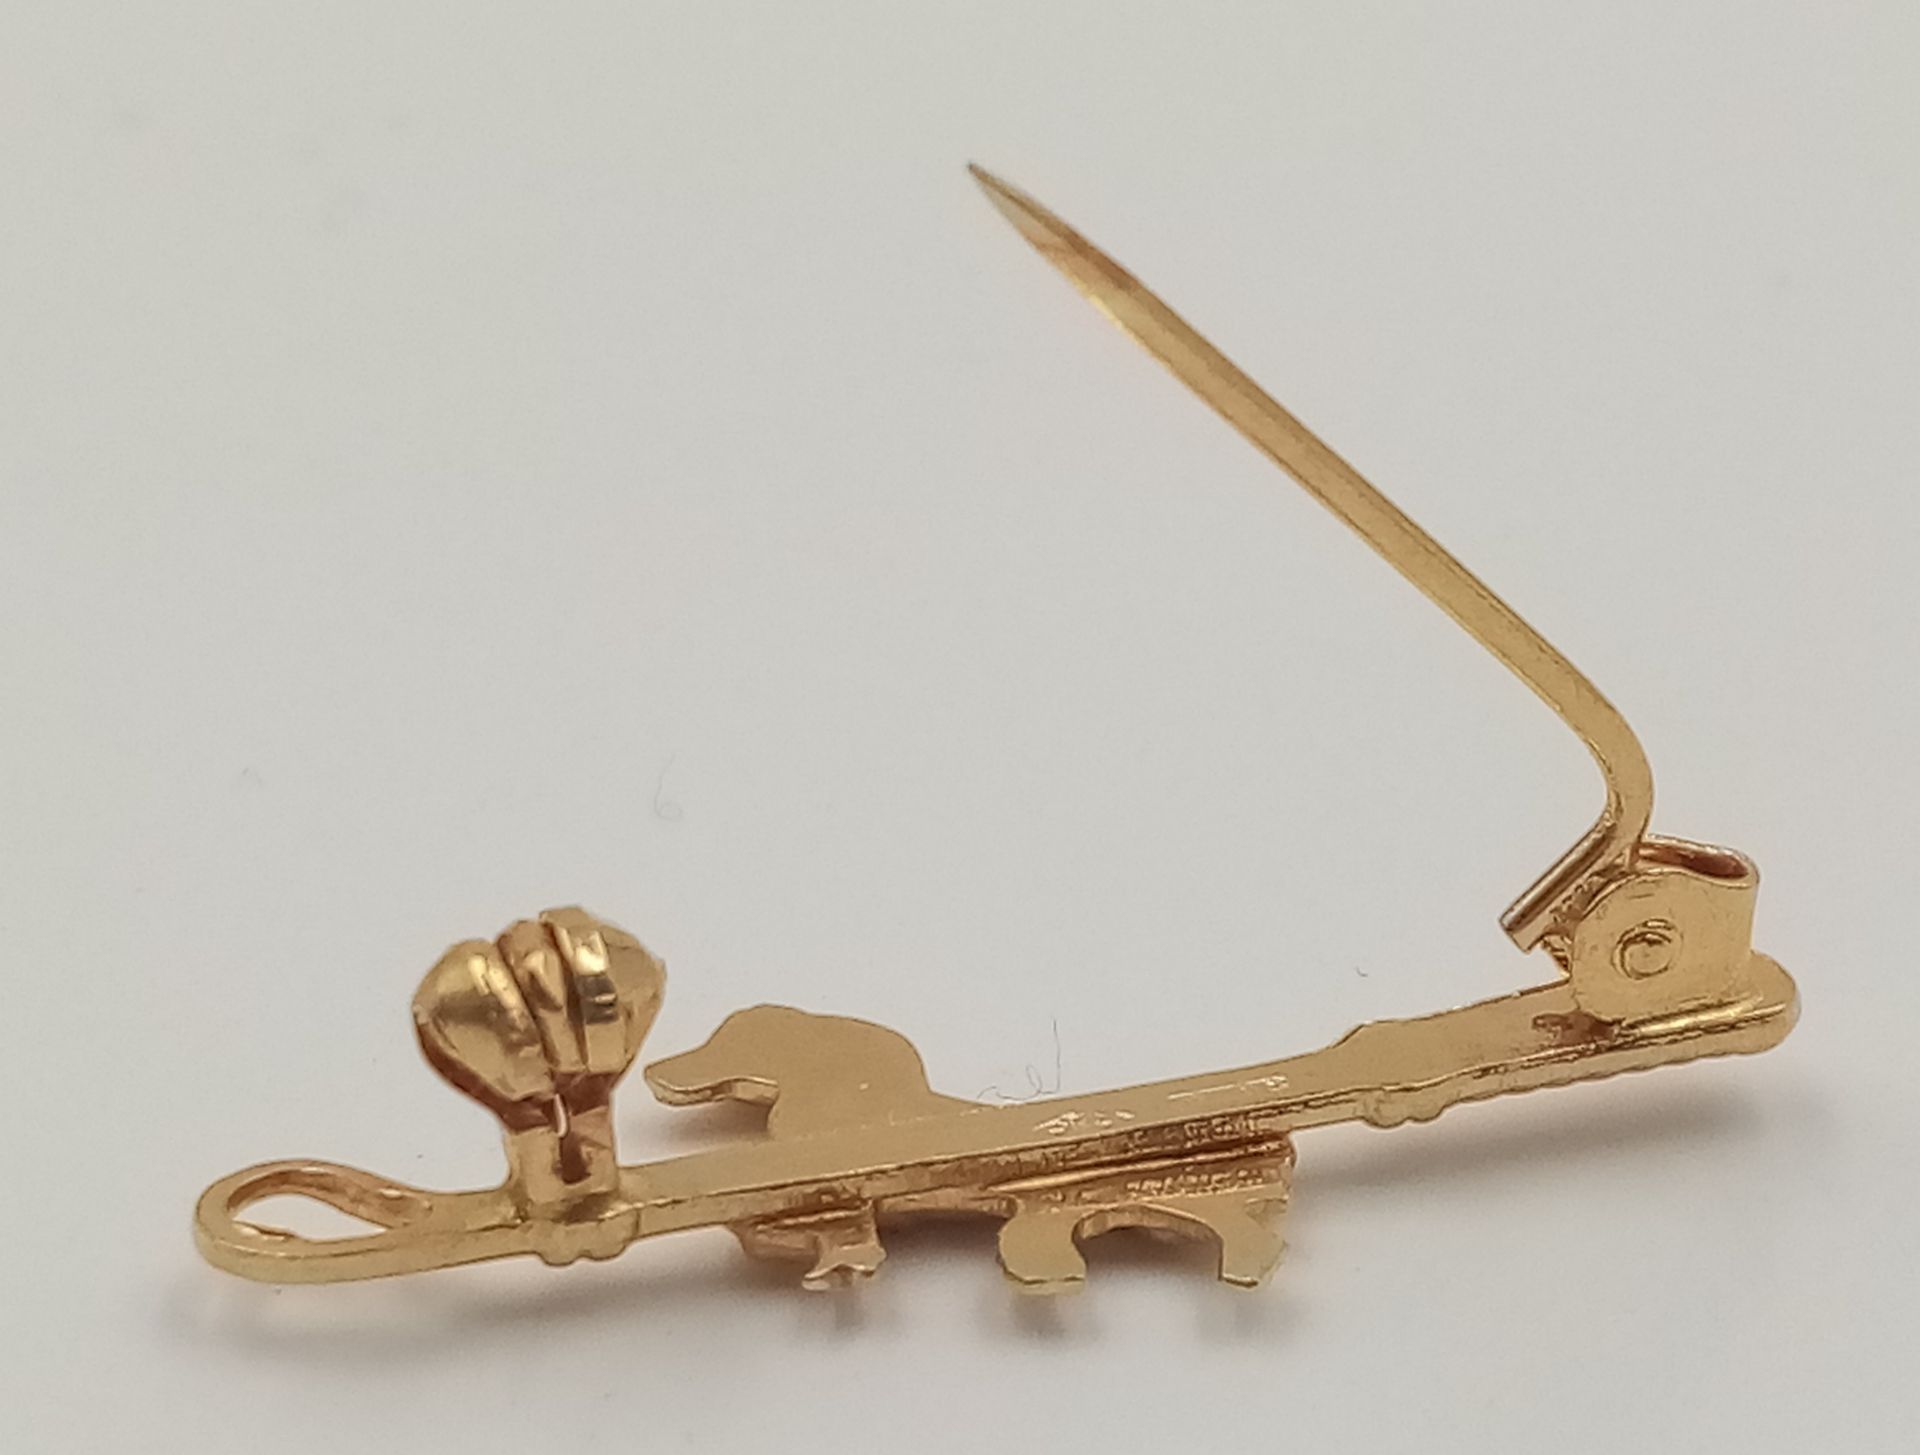 An 18 K yellow gold of riding interest depicting a horse and a riding crop, pin in excellent - Image 2 of 3